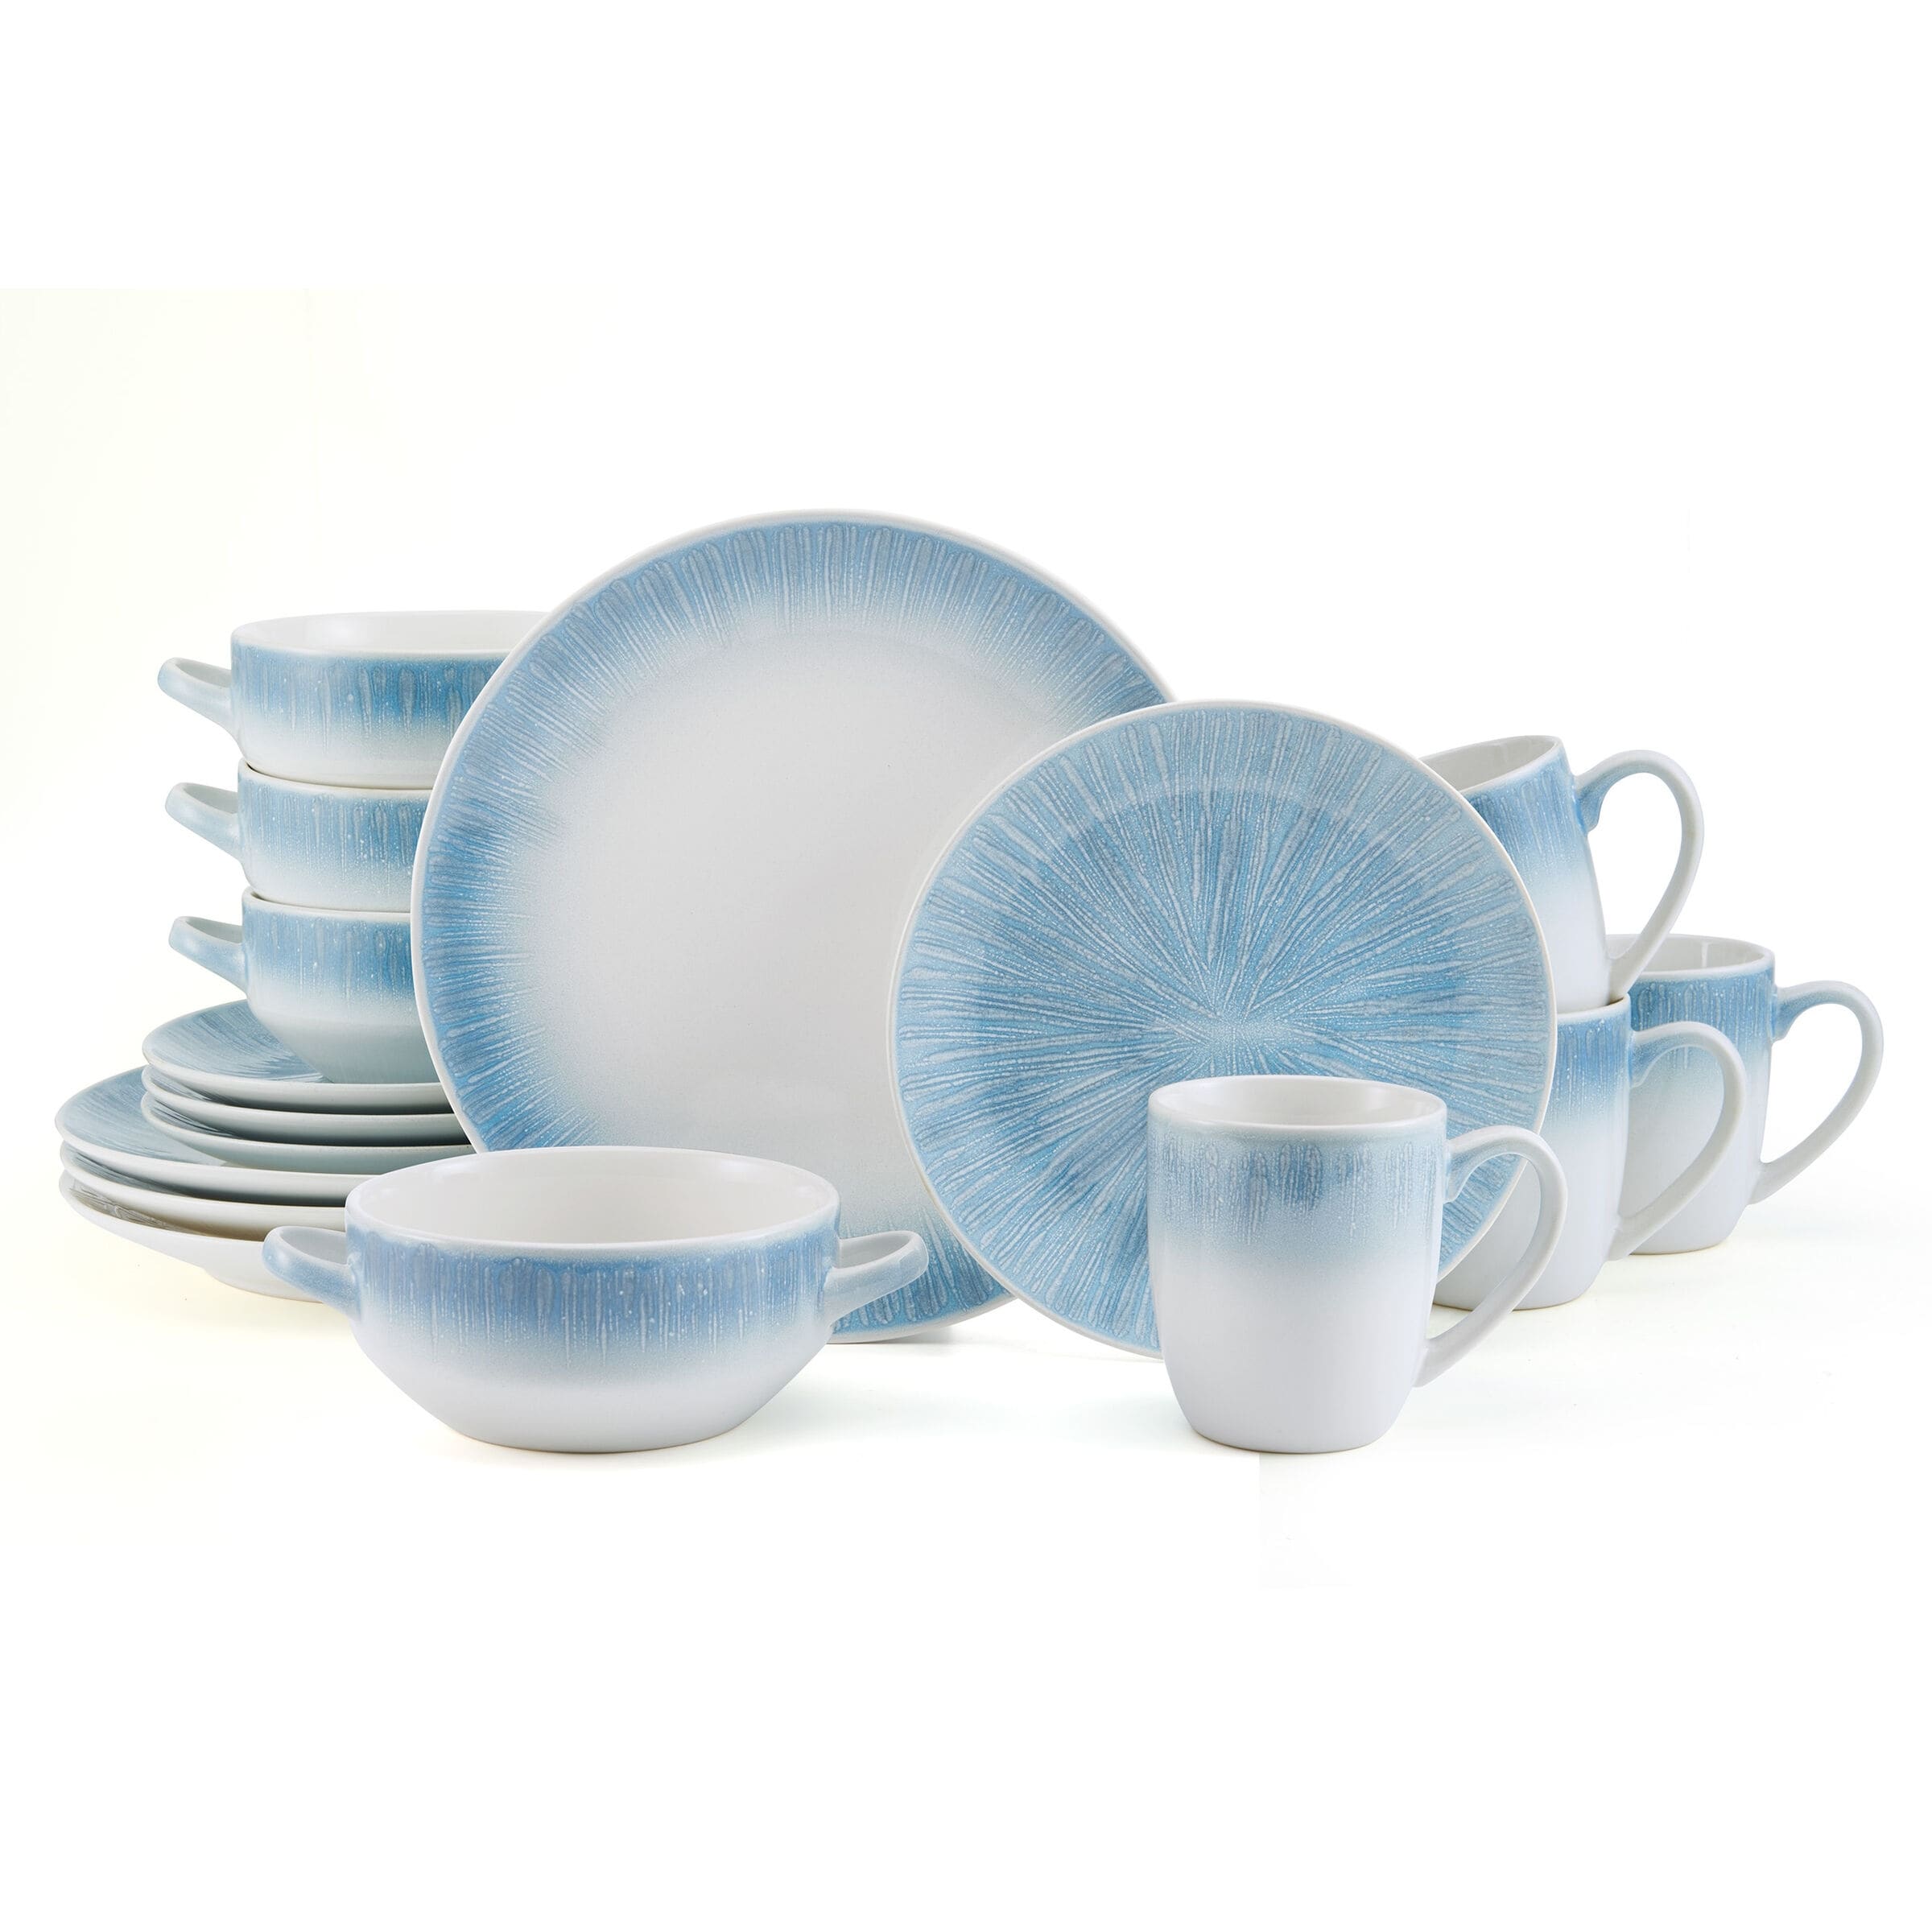 https://ak1.ostkcdn.com/images/products/is/images/direct/f981e0a1bbb8f7be5365b69e5d67f91575b55cab/Pfaltzgraff-Logan-16-pc-Dinnerware-Set%2C-Serv-for-4.jpg